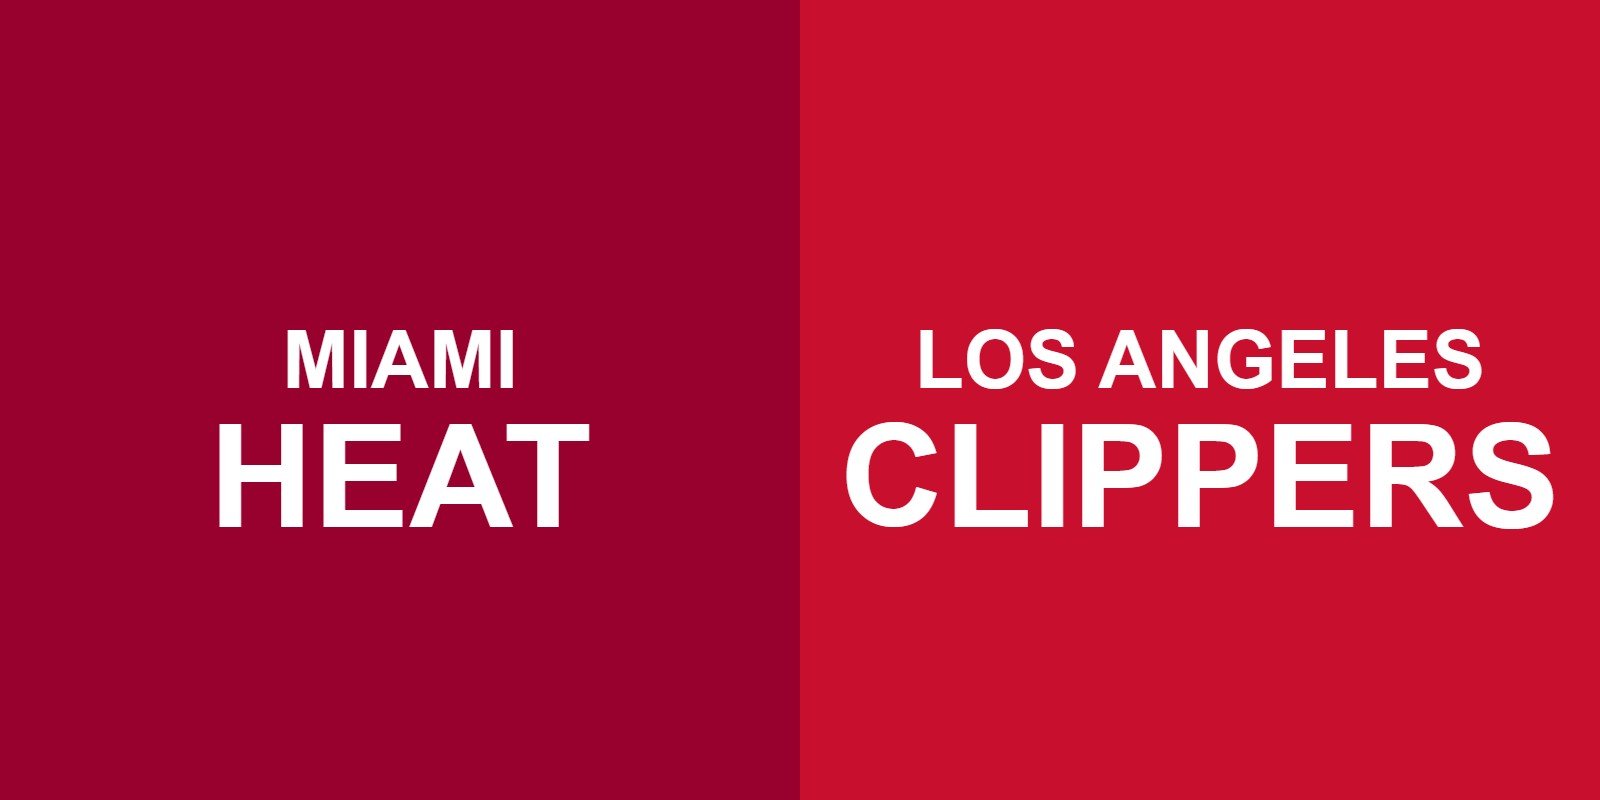 Heat vs Clippers